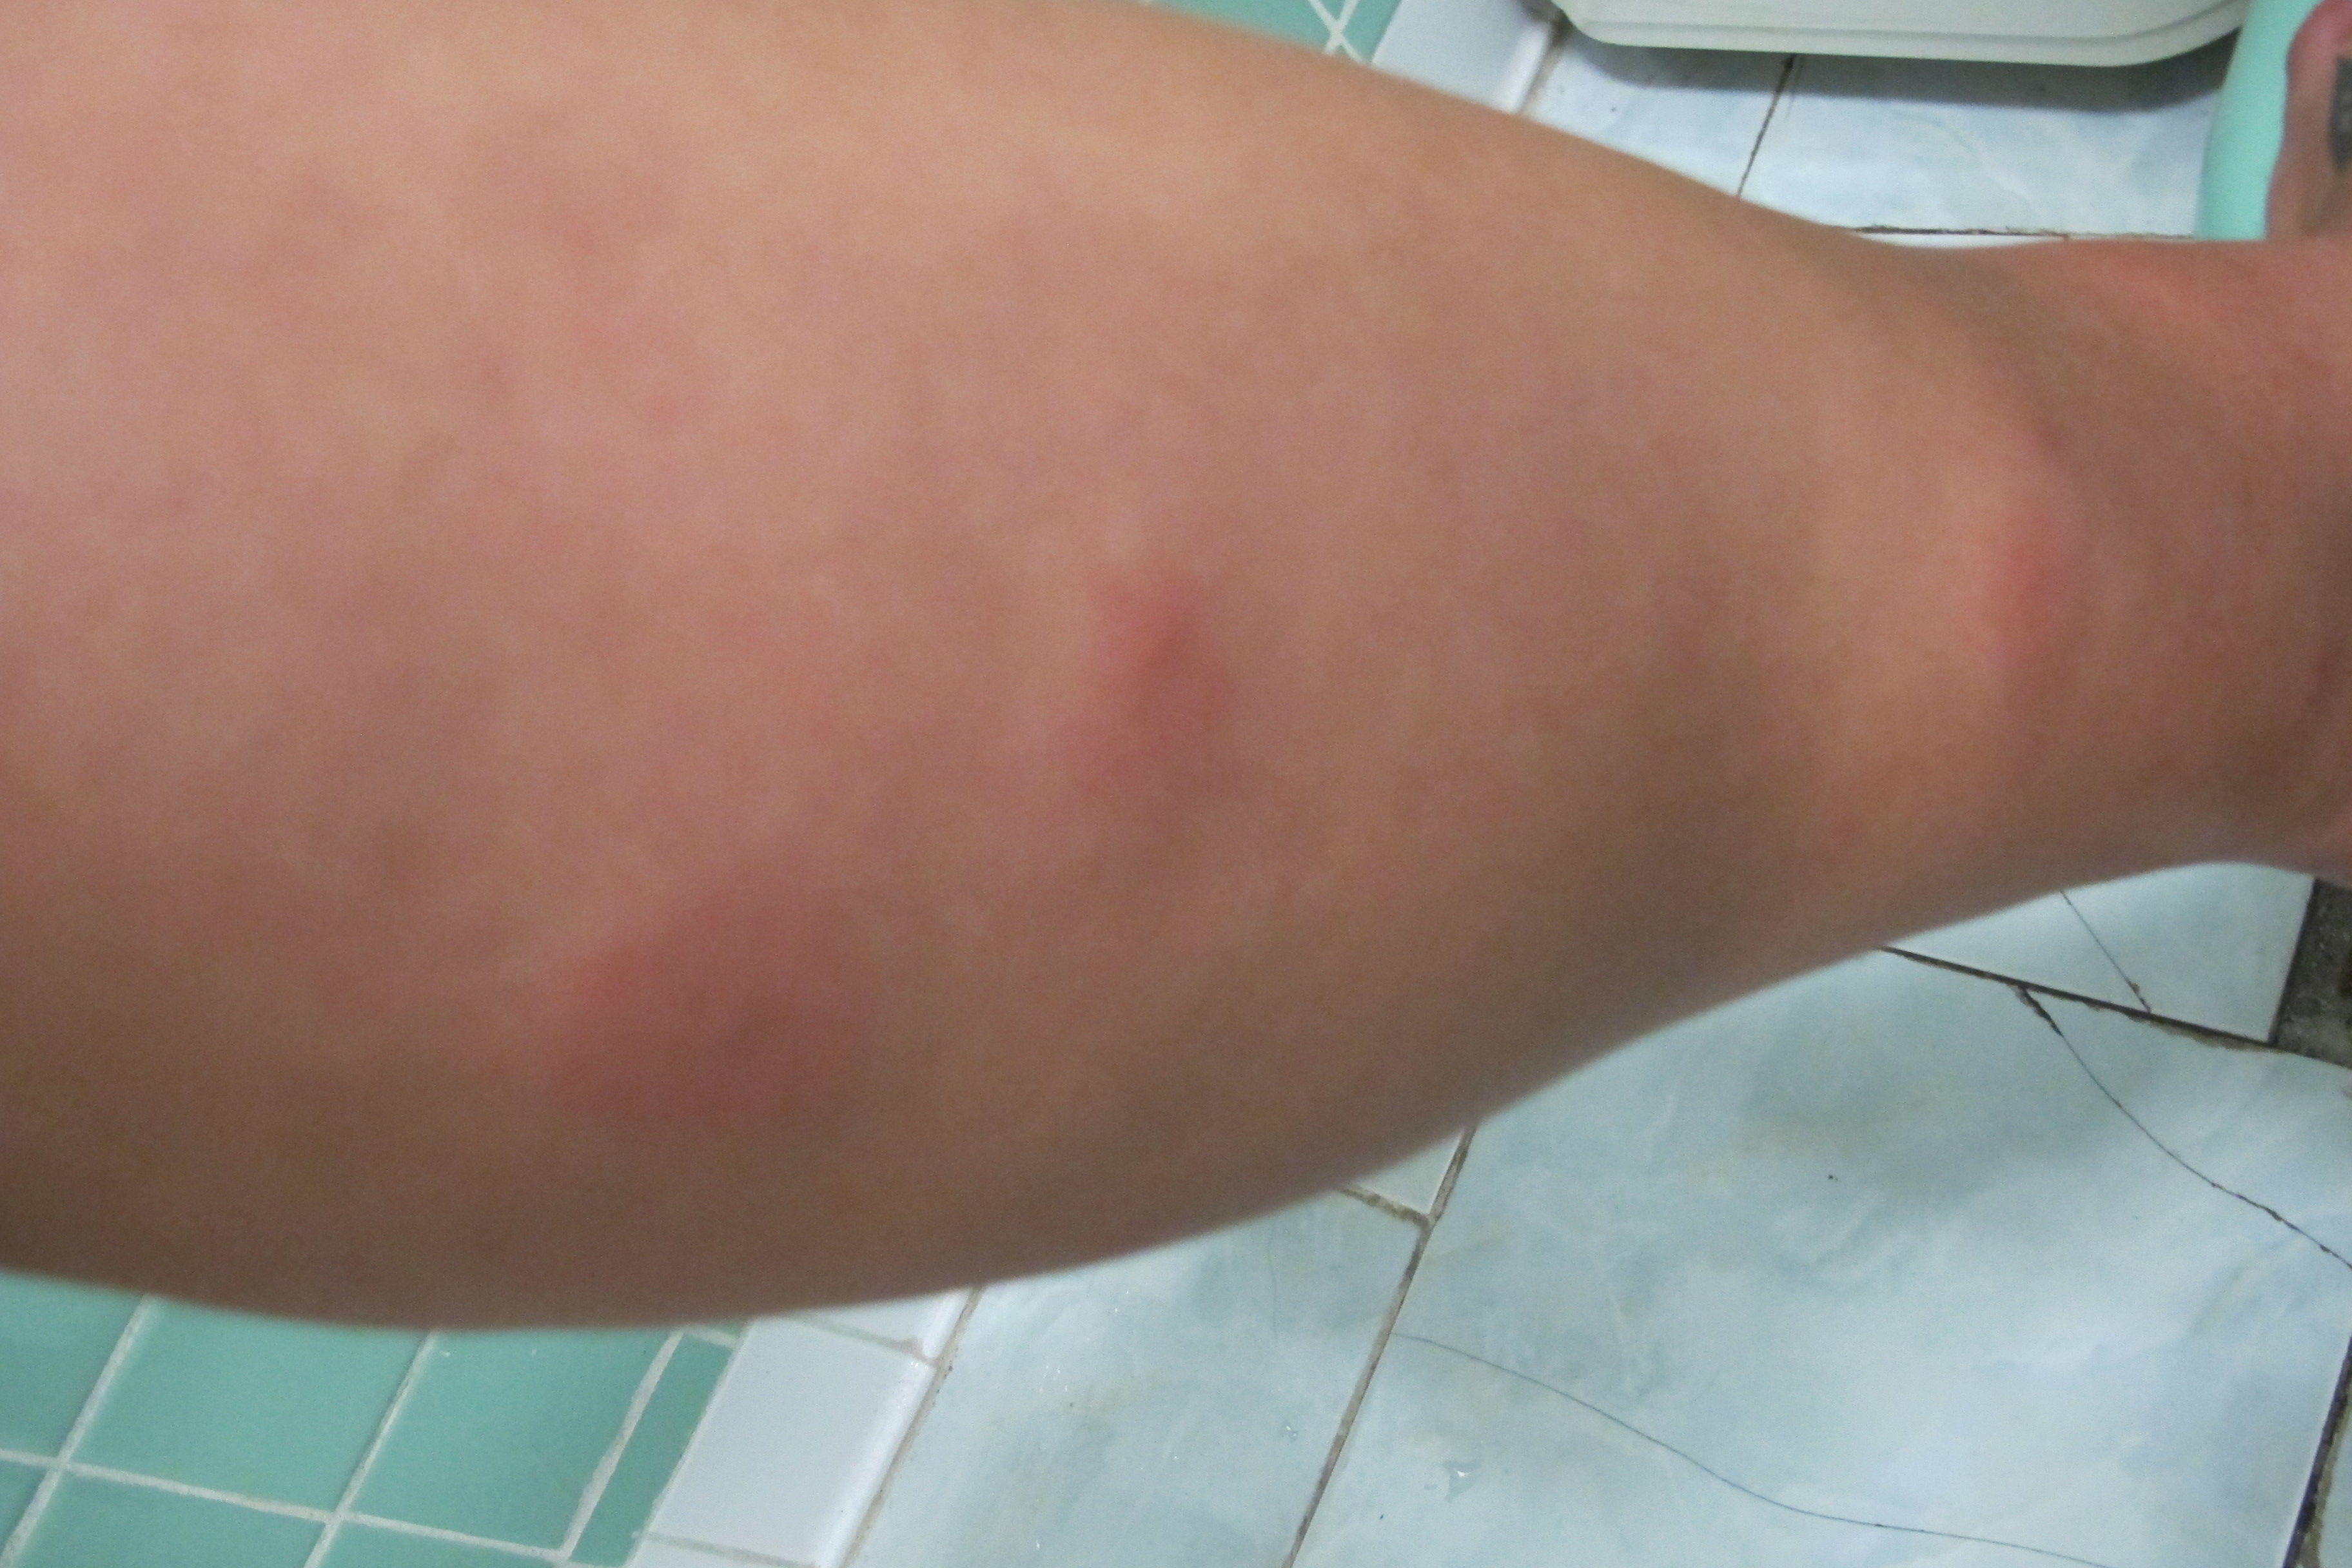 Allergic Mosquito Bites Welts Images & Pictures - Becuo